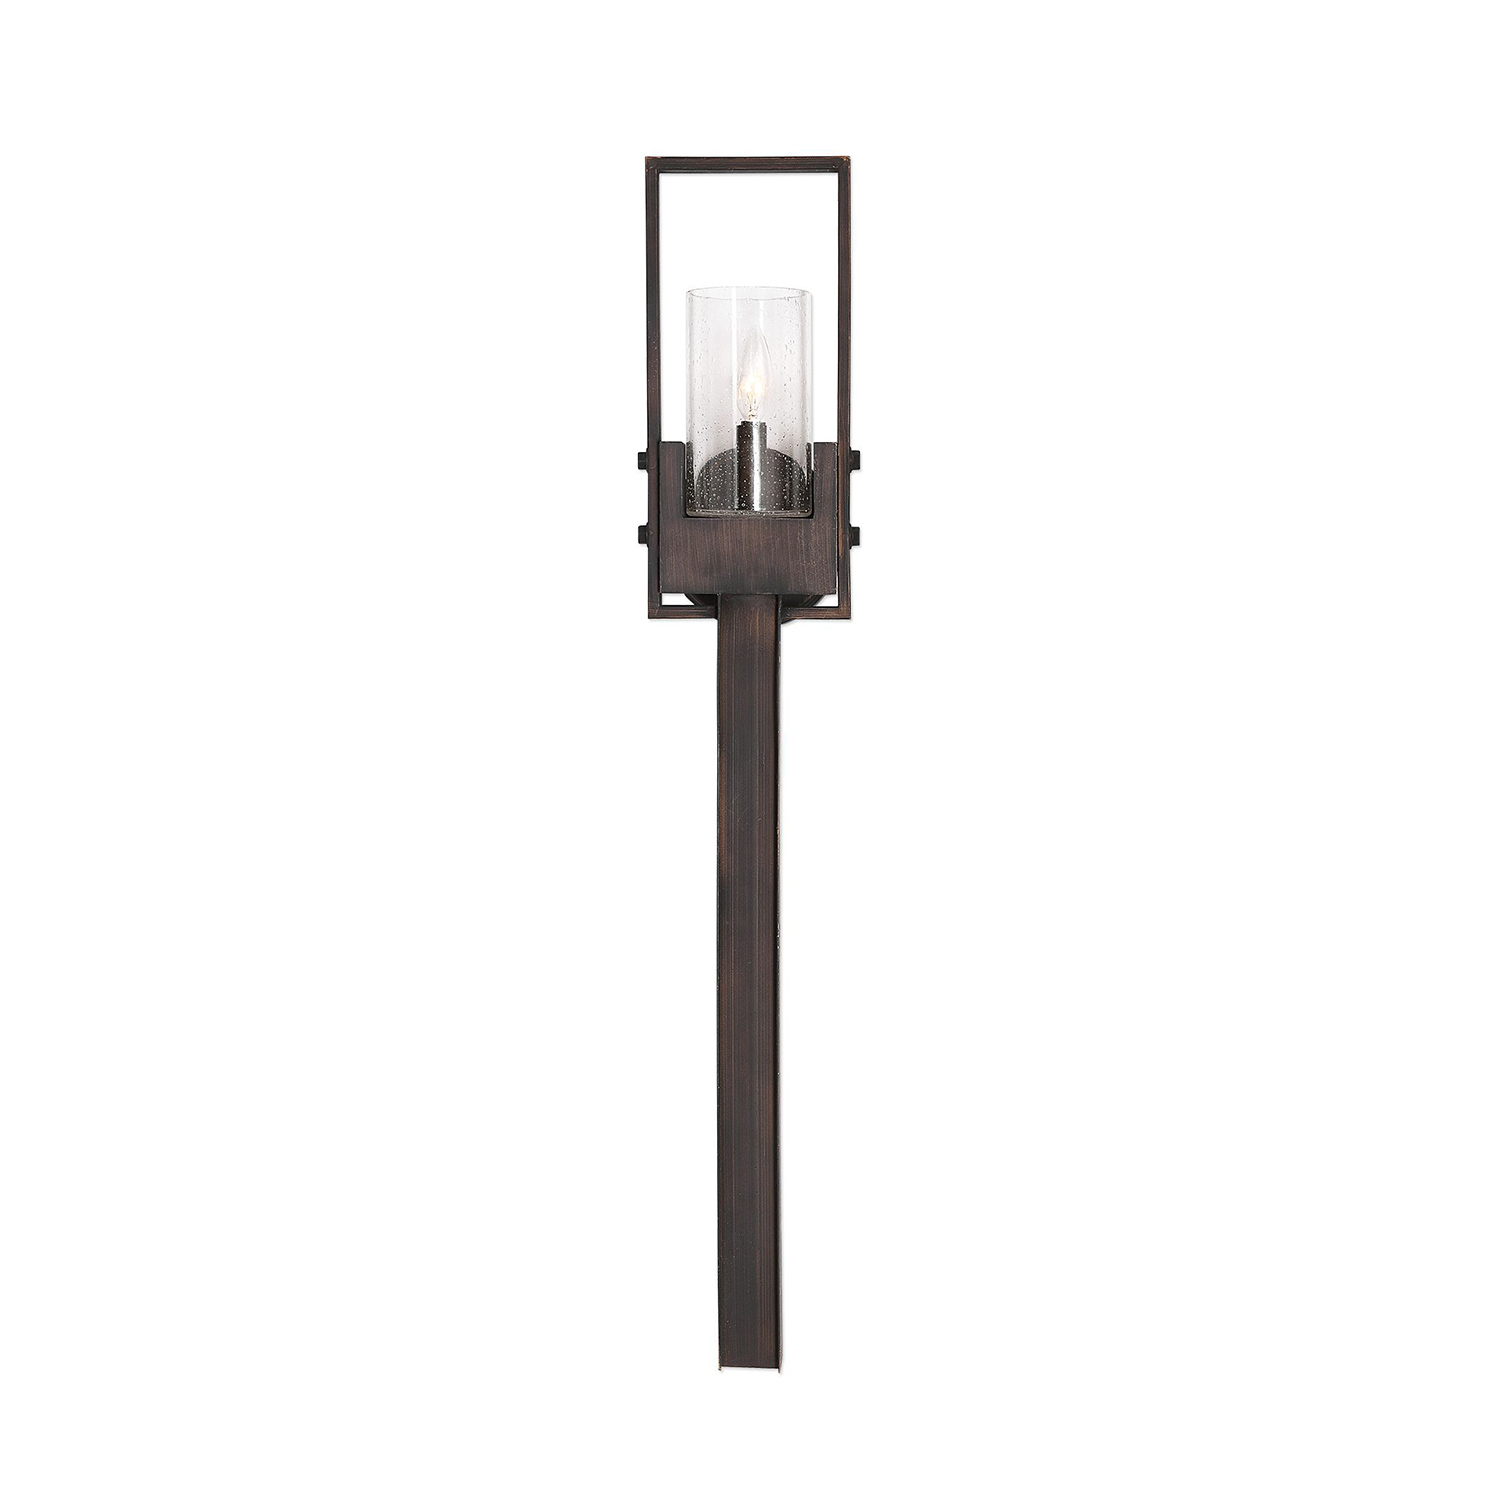 Uttermost Pinecroft Light Sconce - Rustic